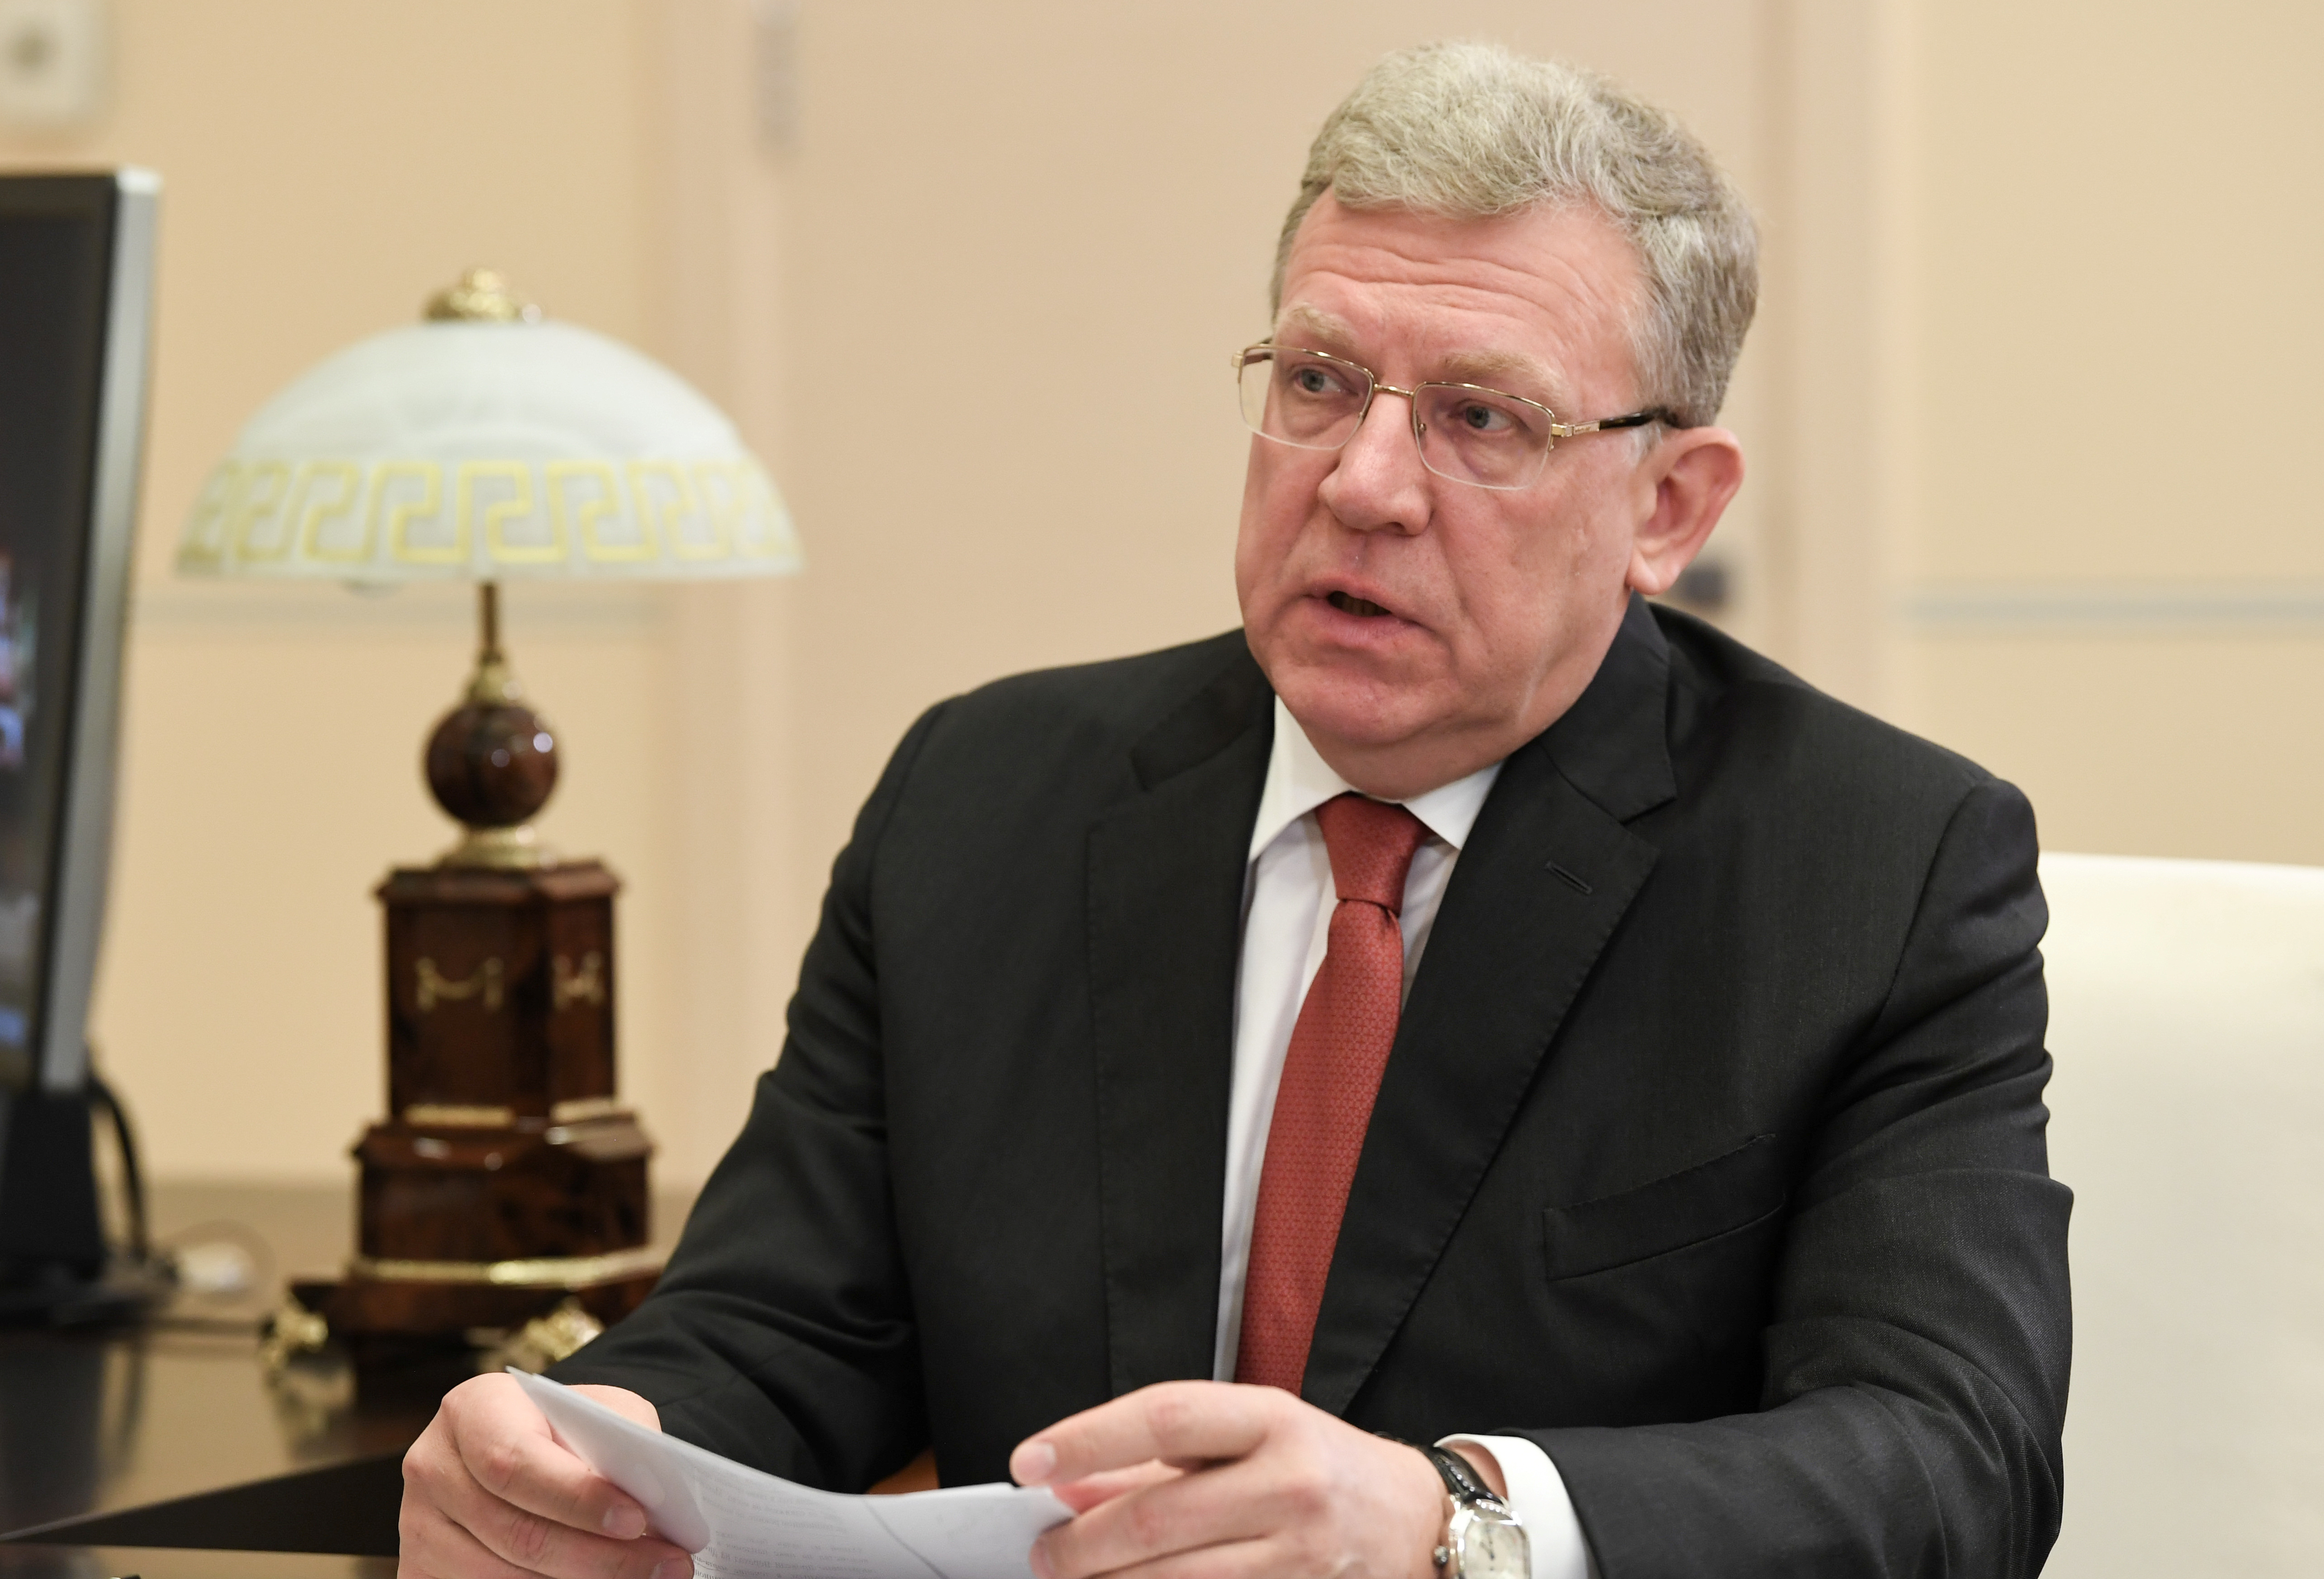 Russian President Putin meets with head of the Audit Chamber Kudrin in Moscow